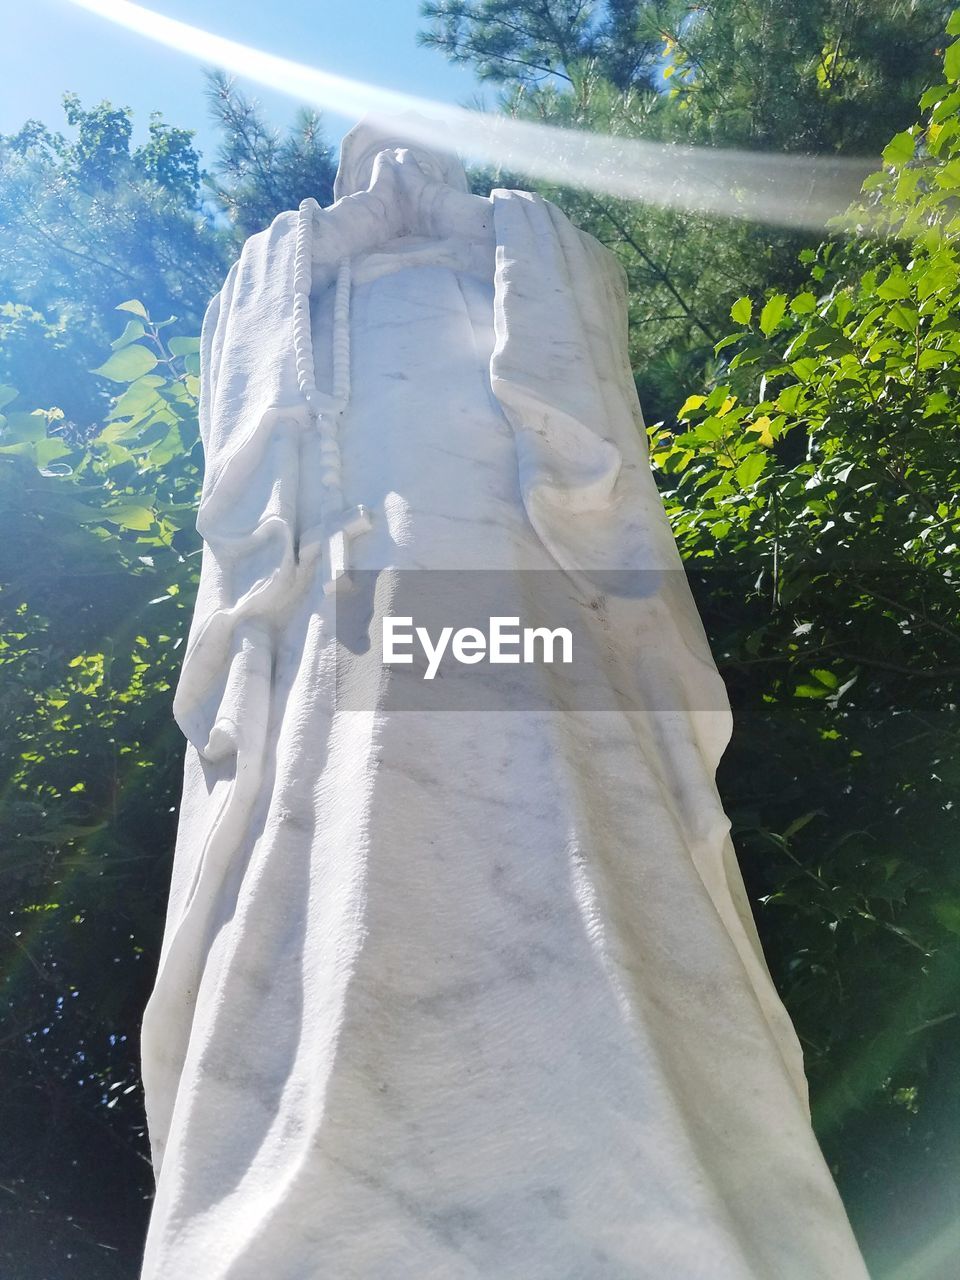 LOW ANGLE VIEW OF STATUE HANGING AGAINST TREES